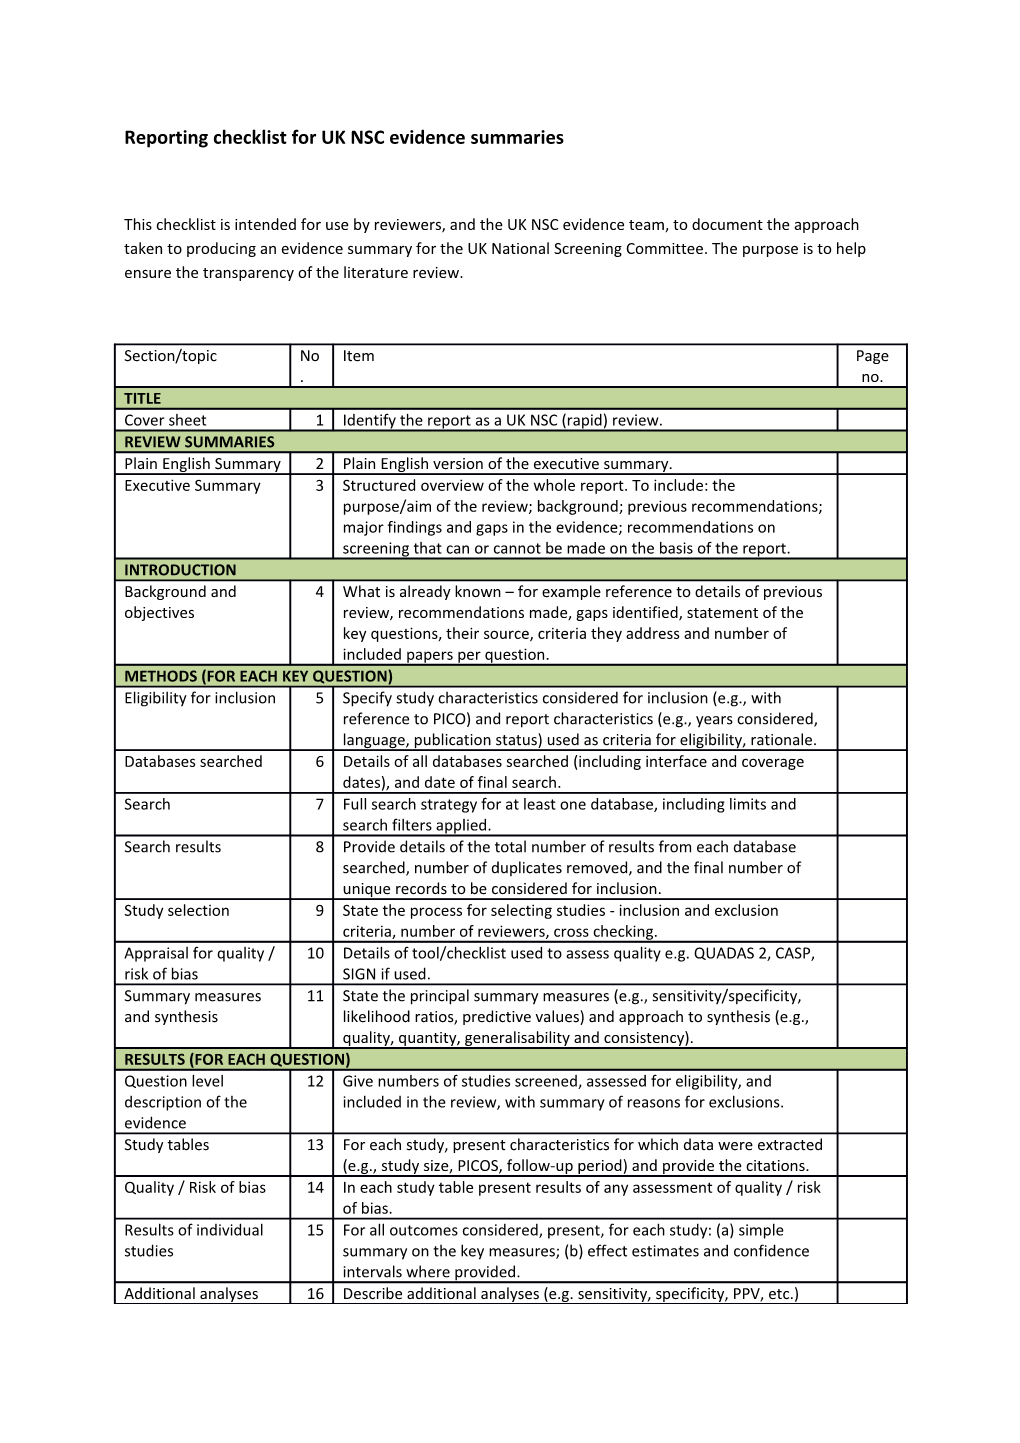 Reporting Checklist for UK NSC Evidence Summaries